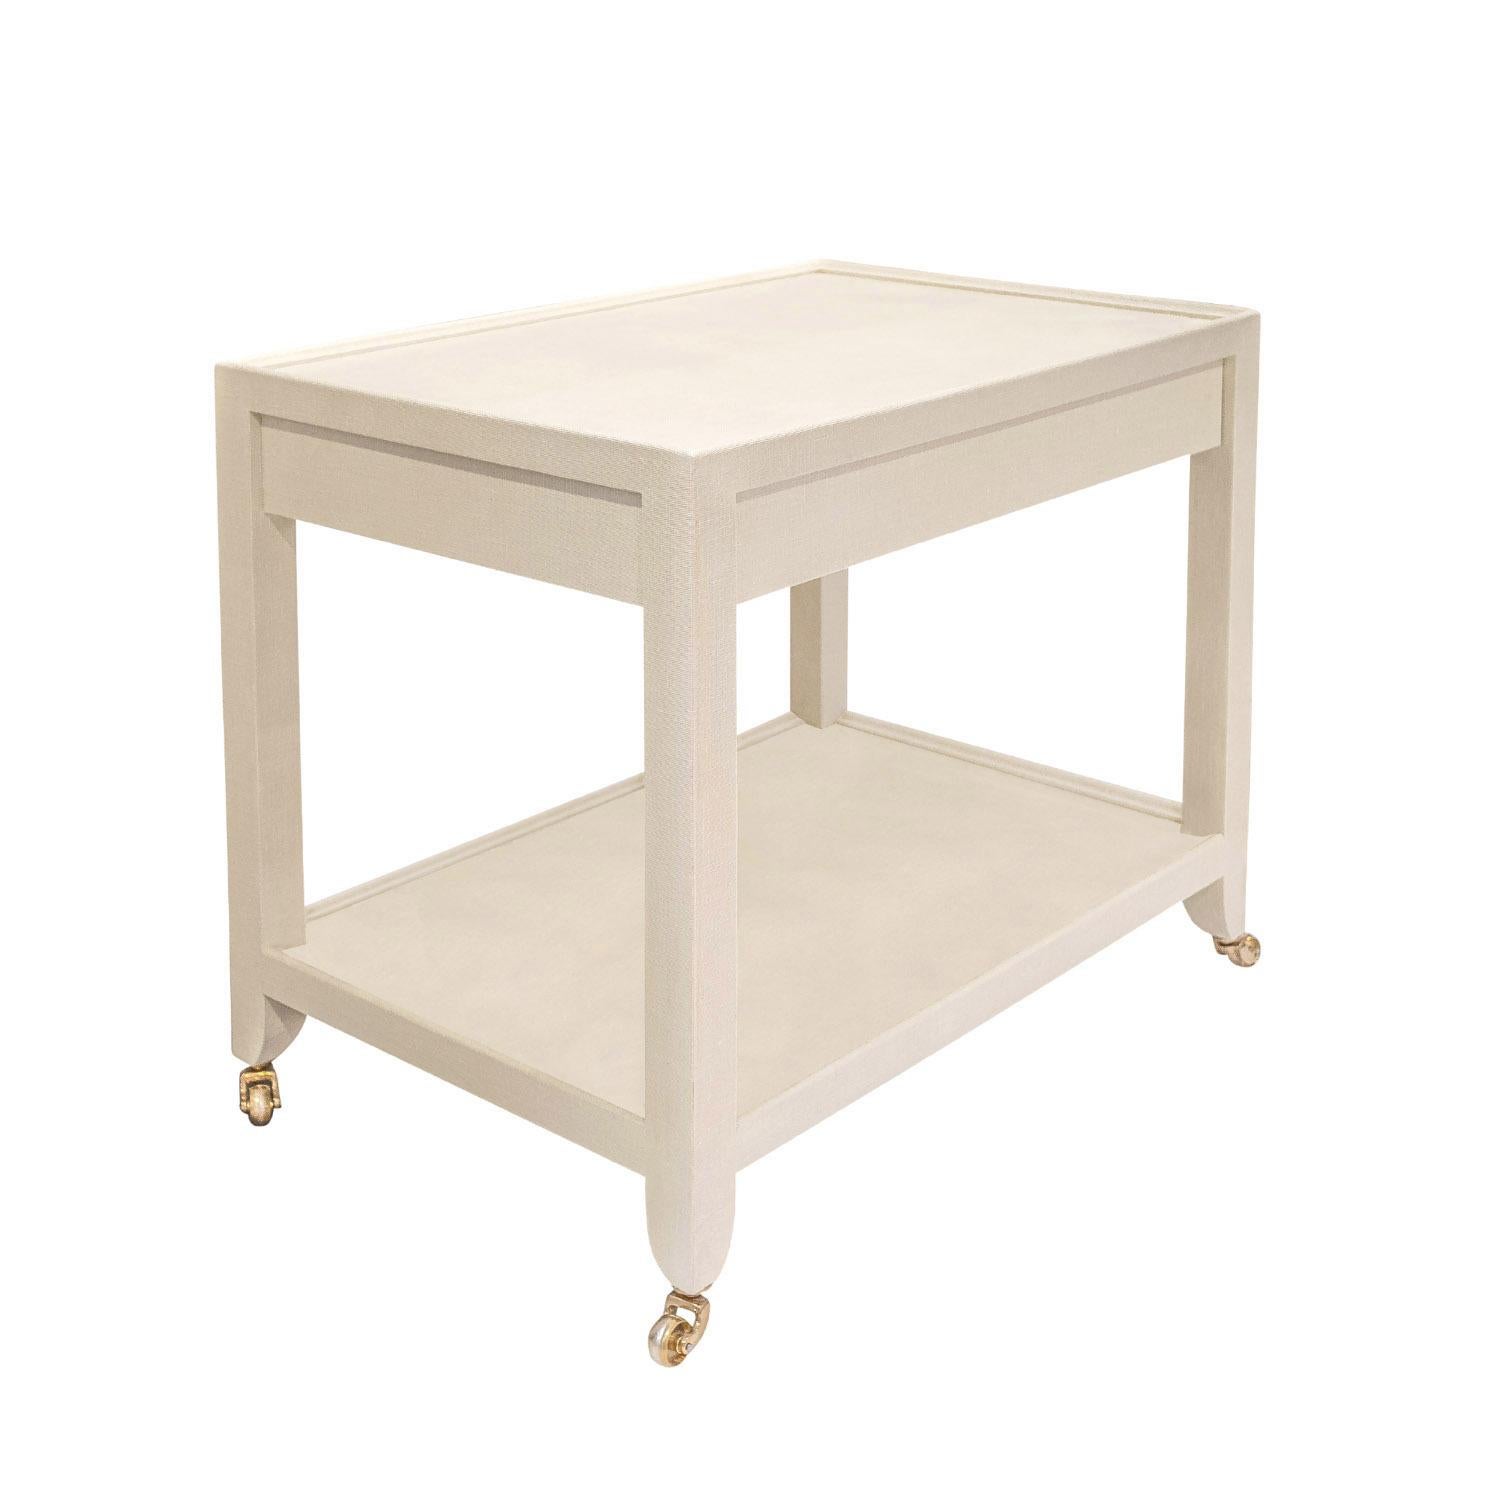 American Karl Springer 2-Tier Side Table in Lacquered Linen 2002 'Signed' For Sale